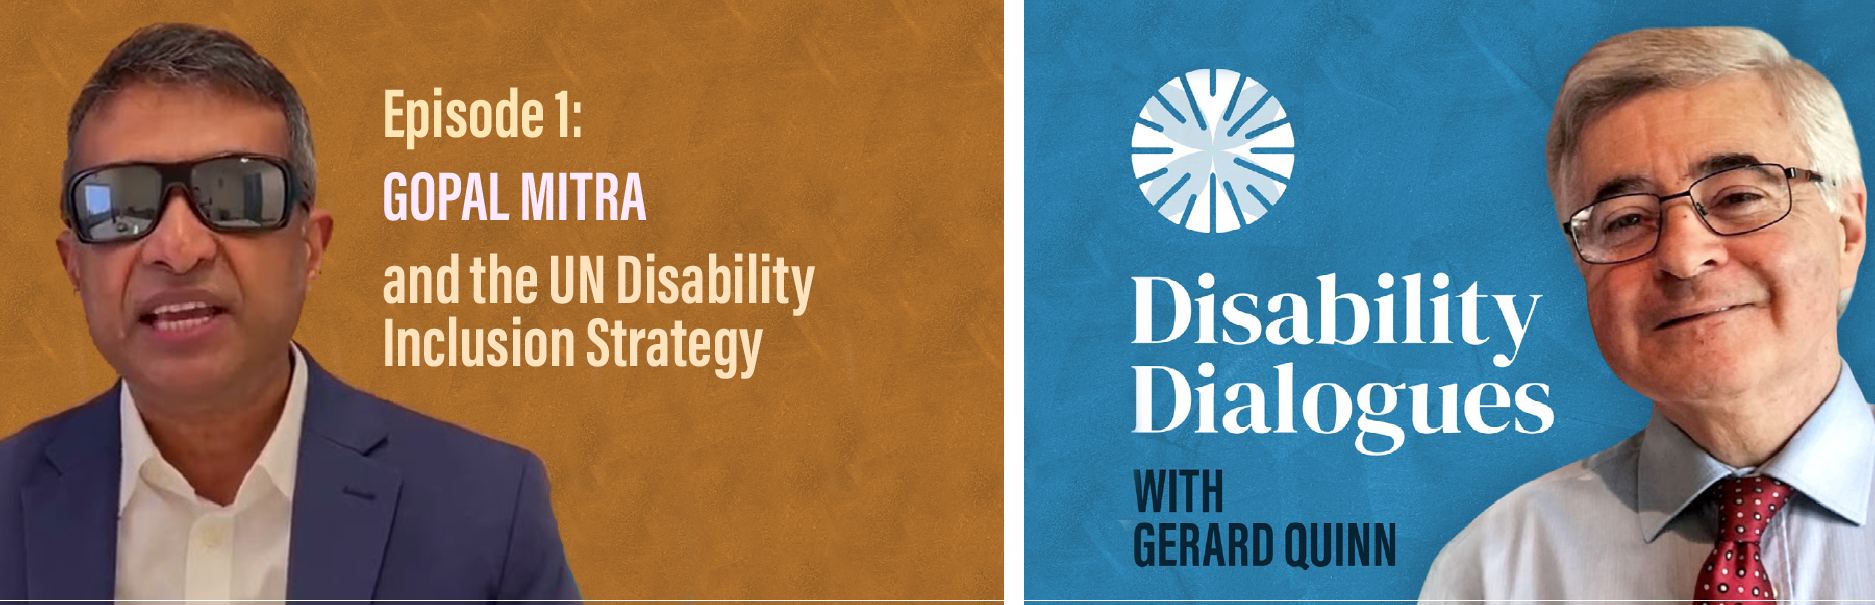 Podcast banner, with photos of Gerard Quinn and Gopal Mitra, and name of Podcast: Disability Dialogues